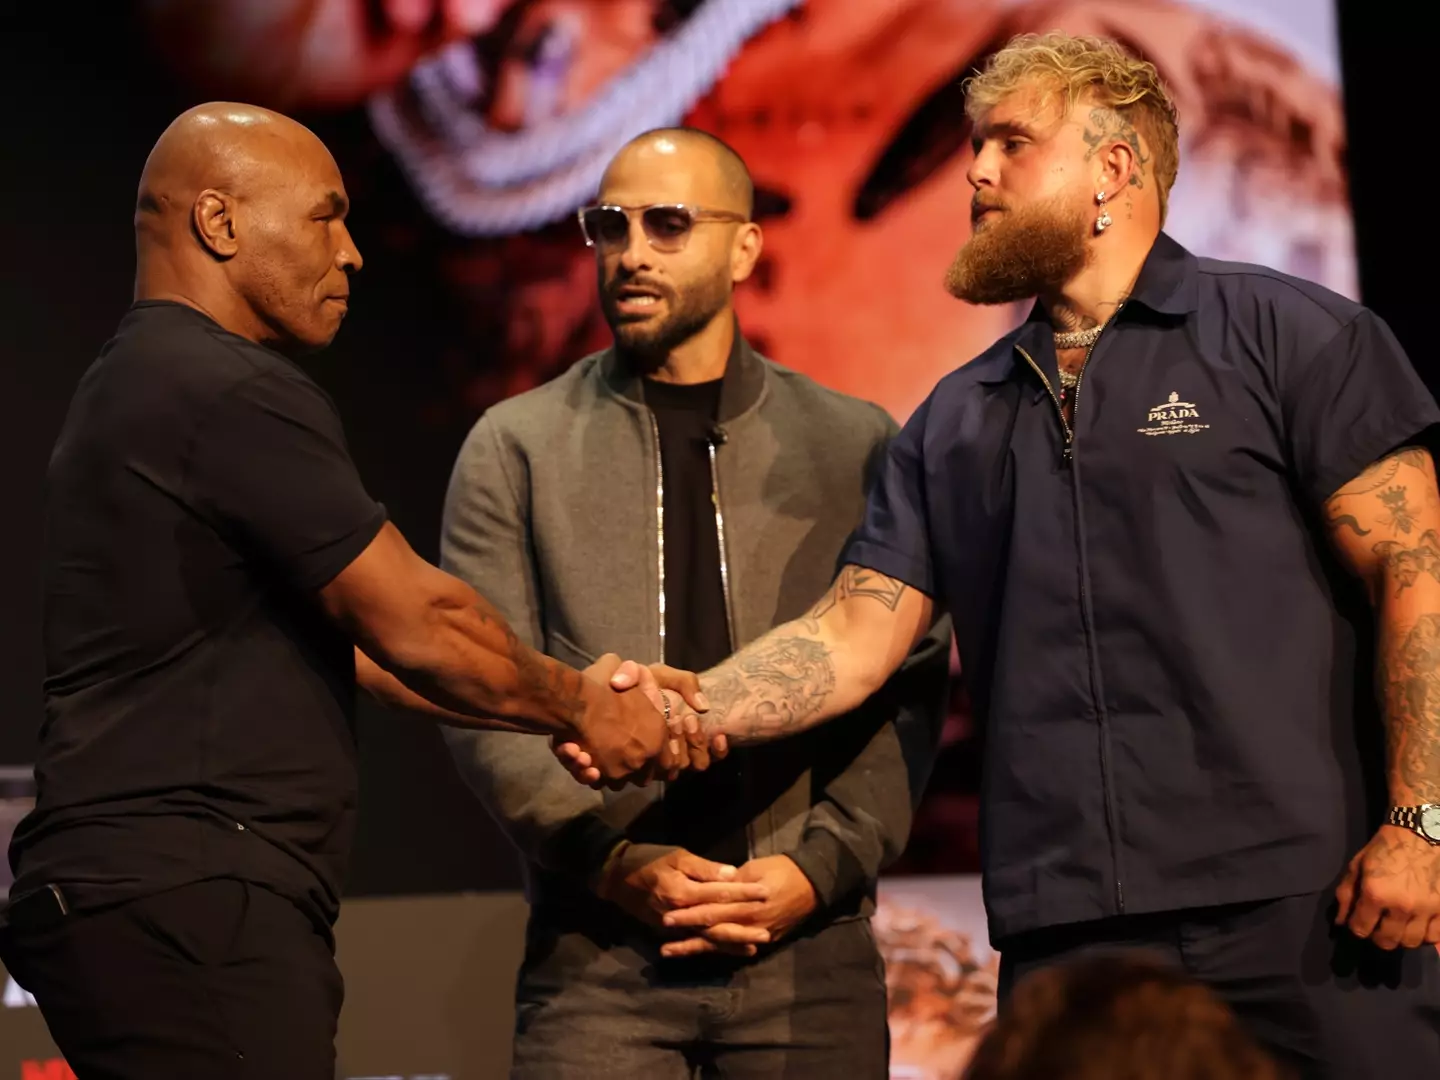 The fight will be rescheduled to a date later this year. (Shareif Ziyadat/Getty Images)